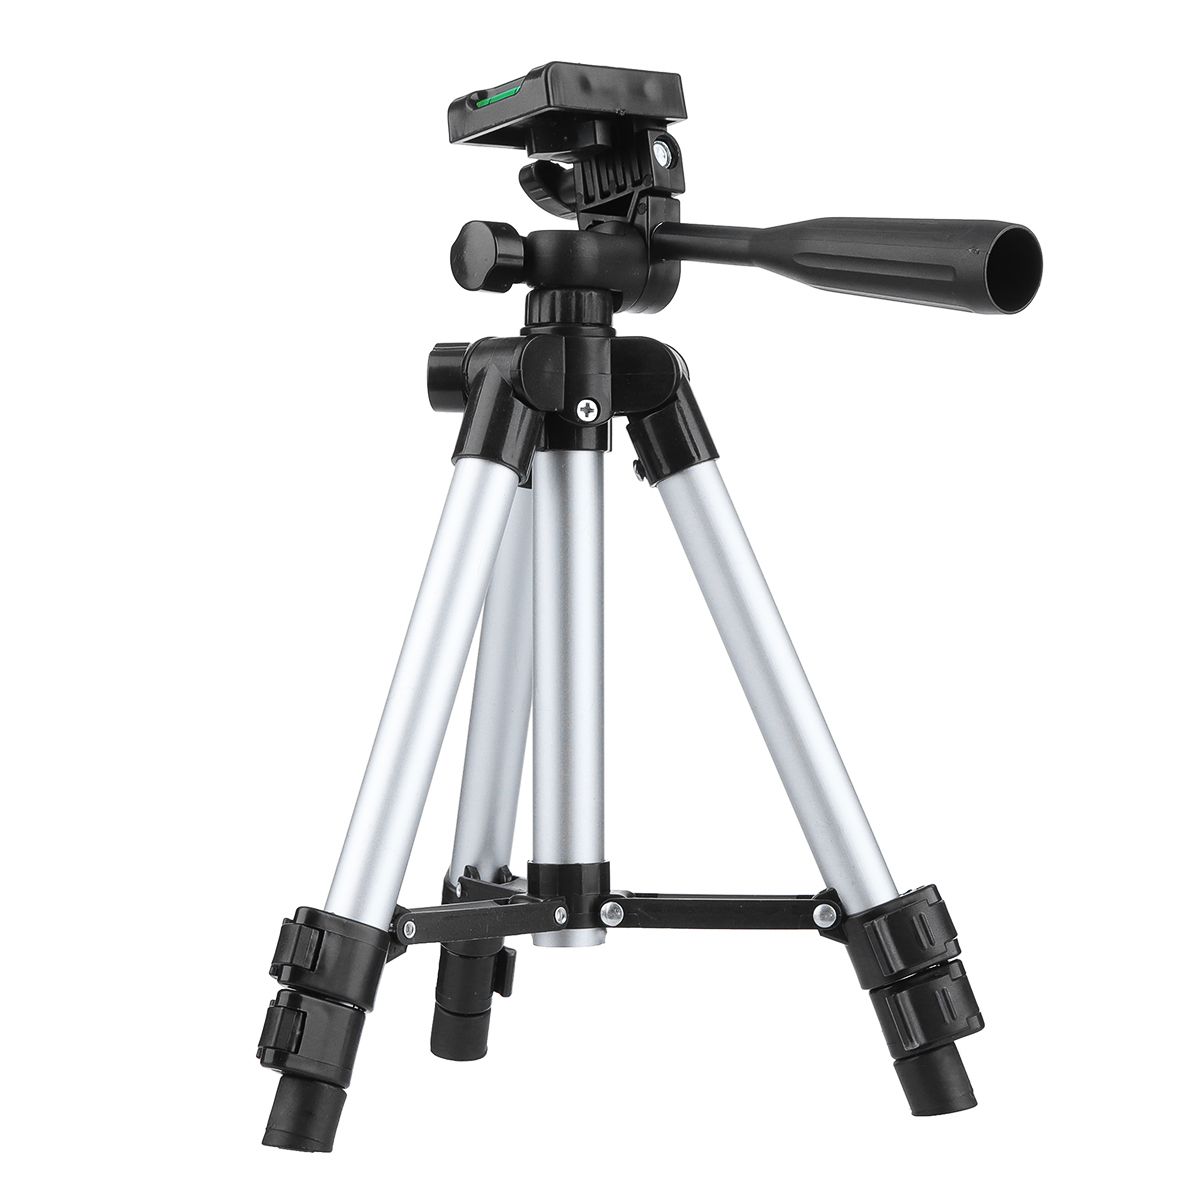 Portable-Extendable-Adjustable-Camera-Projector-Tripod-Stand-Studio-for-DV-Camcorder-Smartphone-Acti-1632650